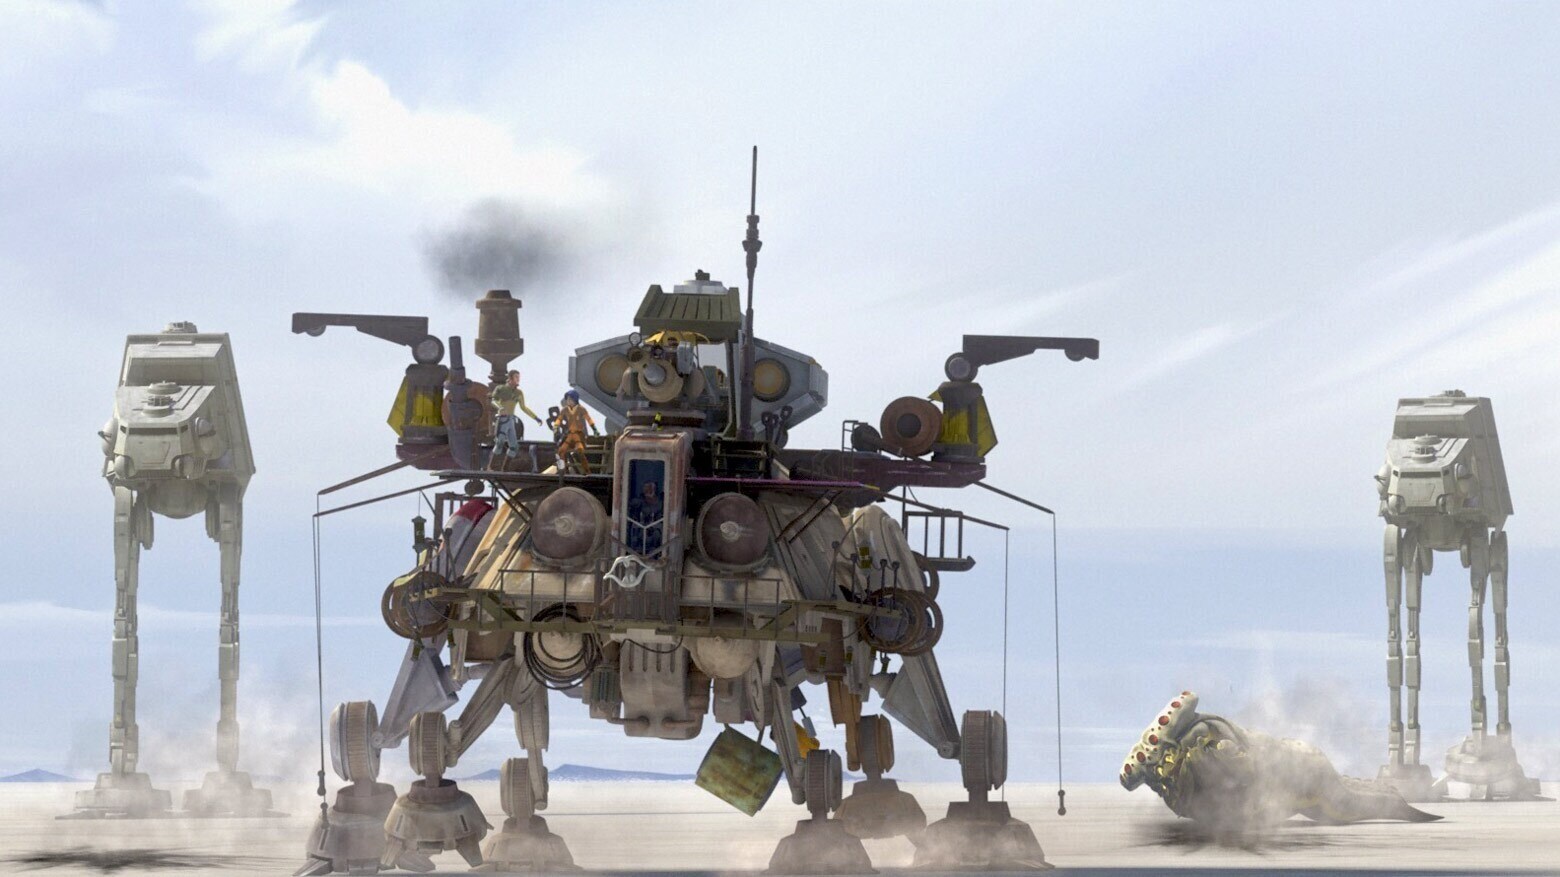 A clone-modified AT-TE walker followed by AT-AT walkers on the plains of Seelos